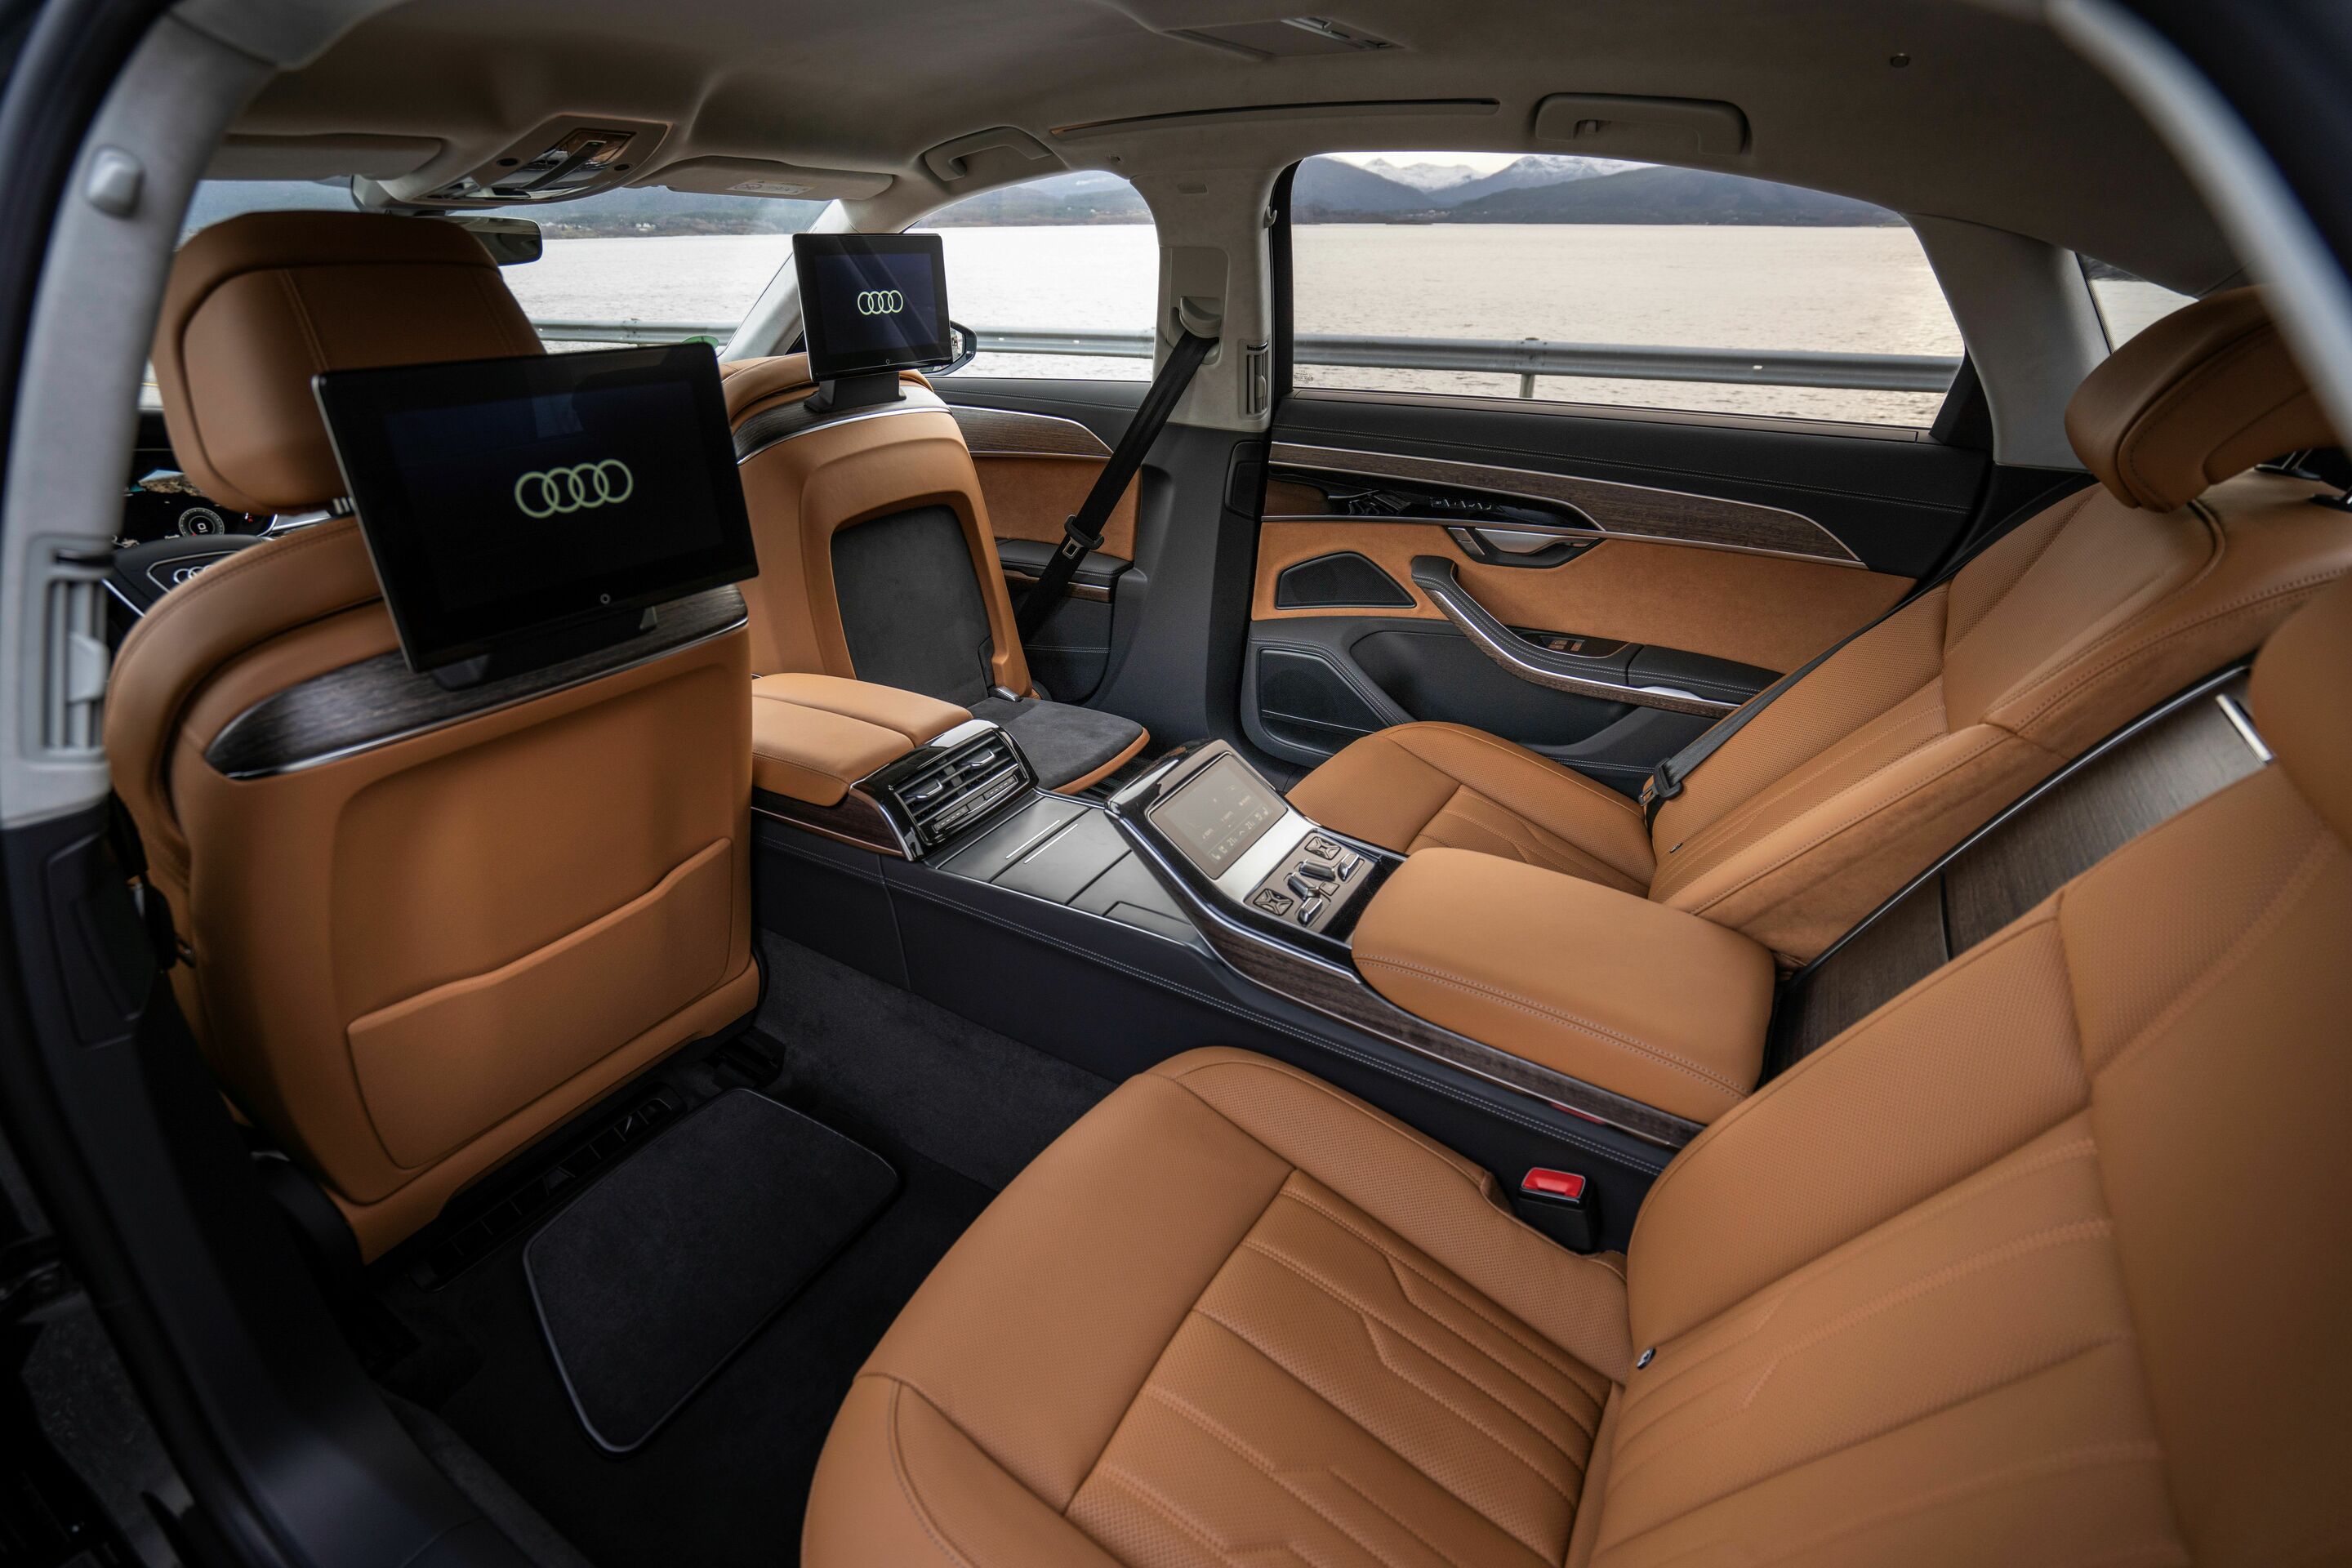 Emotional premium mobility: interior of the Audi A8 offers a high-quality experience